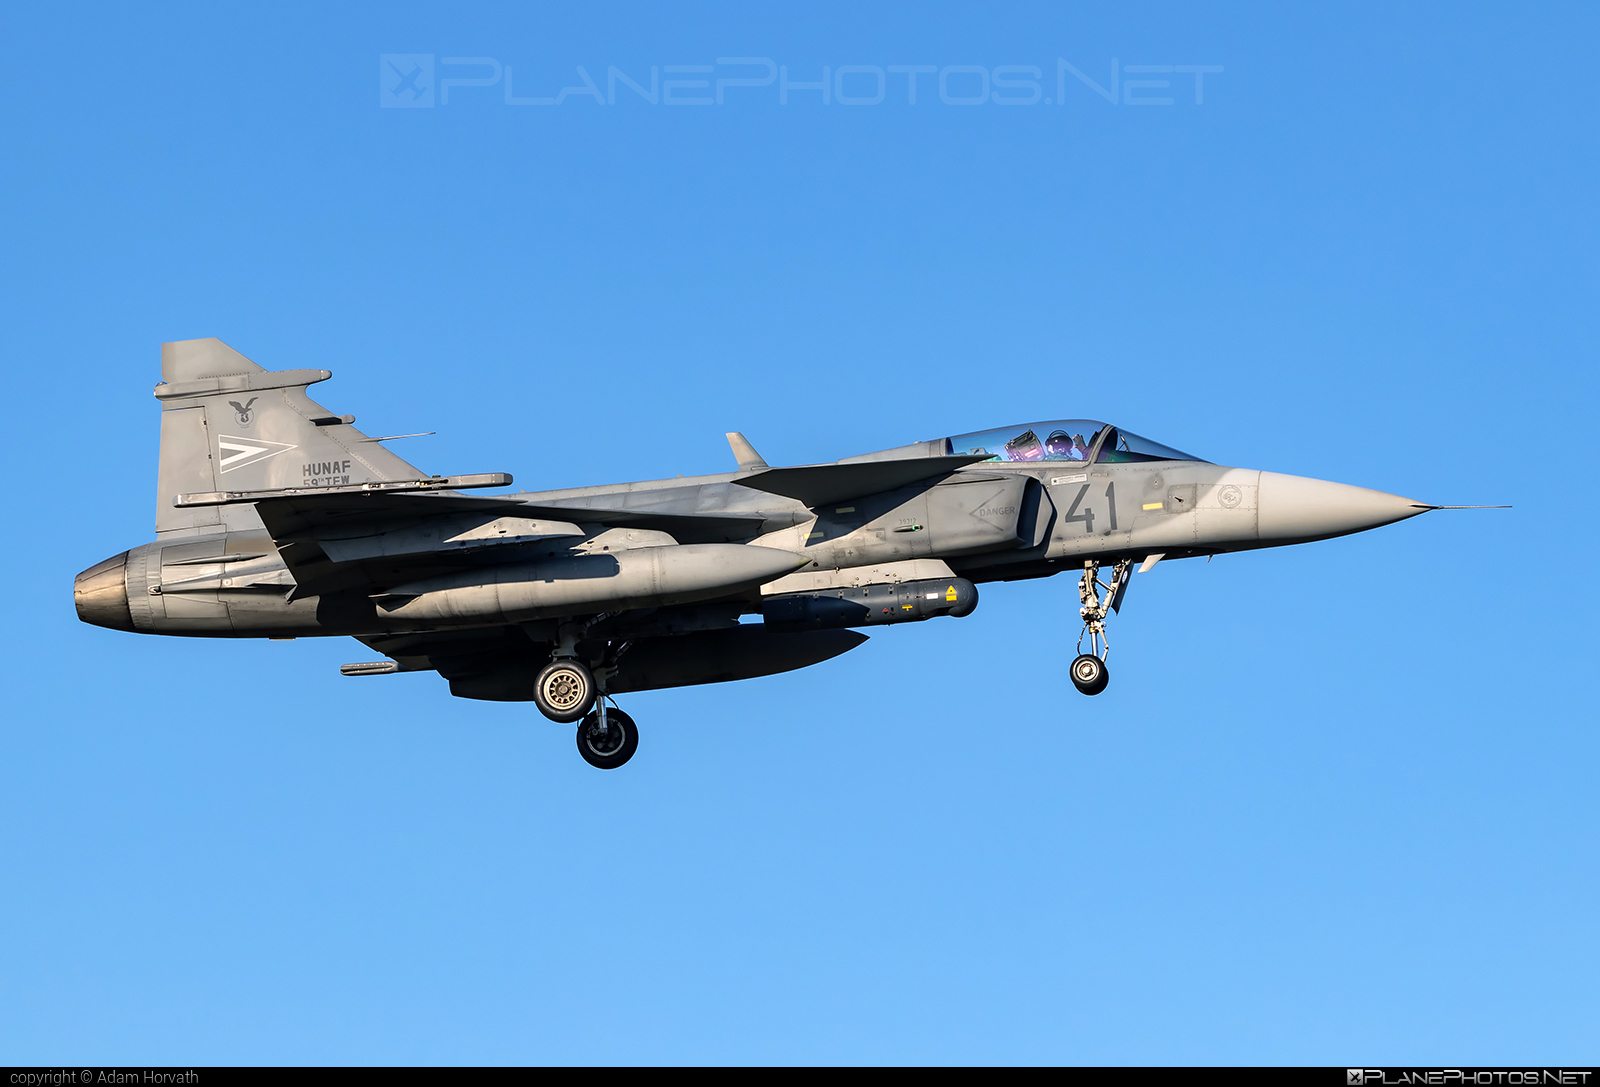 Saab JAS 39C Gripen - 41 operated by Magyar Légierő (Hungarian Air Force) #gripen #hungarianairforce #jas39 #jas39c #jas39gripen #magyarlegiero #saab